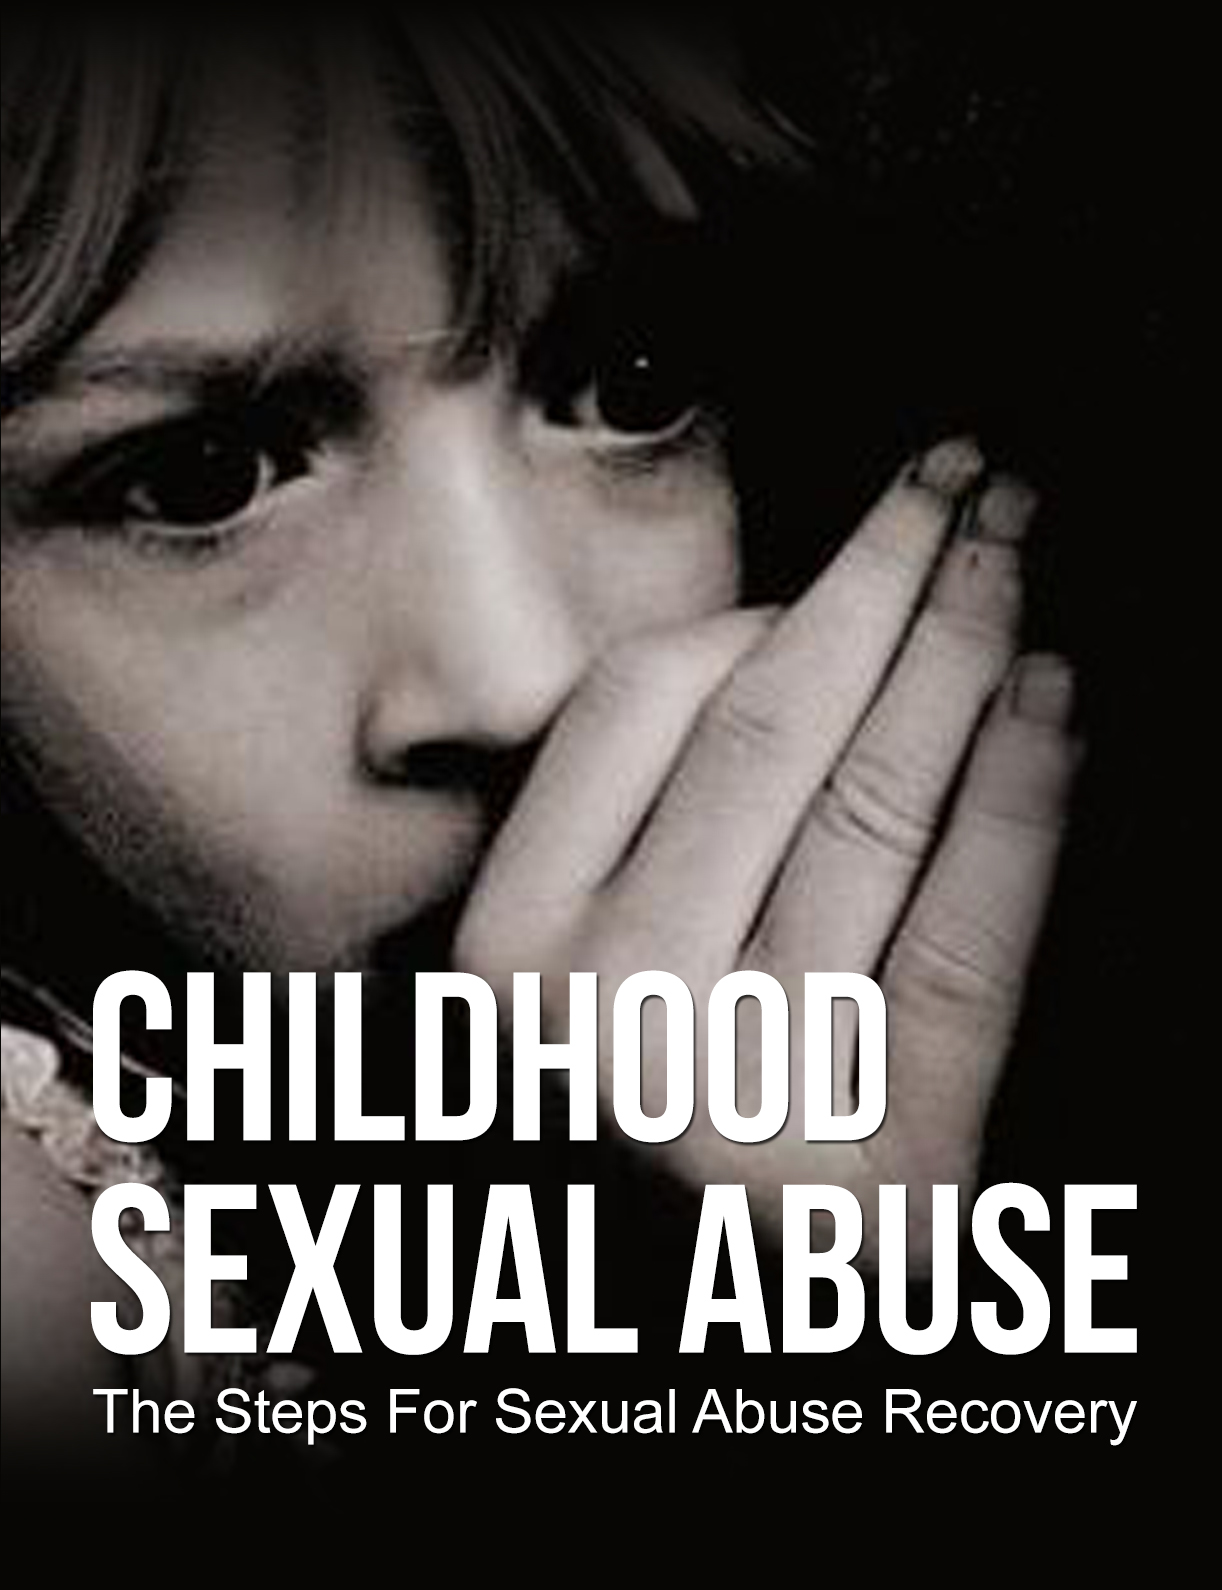 Childhood Sexual Abuse: The Steps For Sexual Abuse Recovery by Brent R